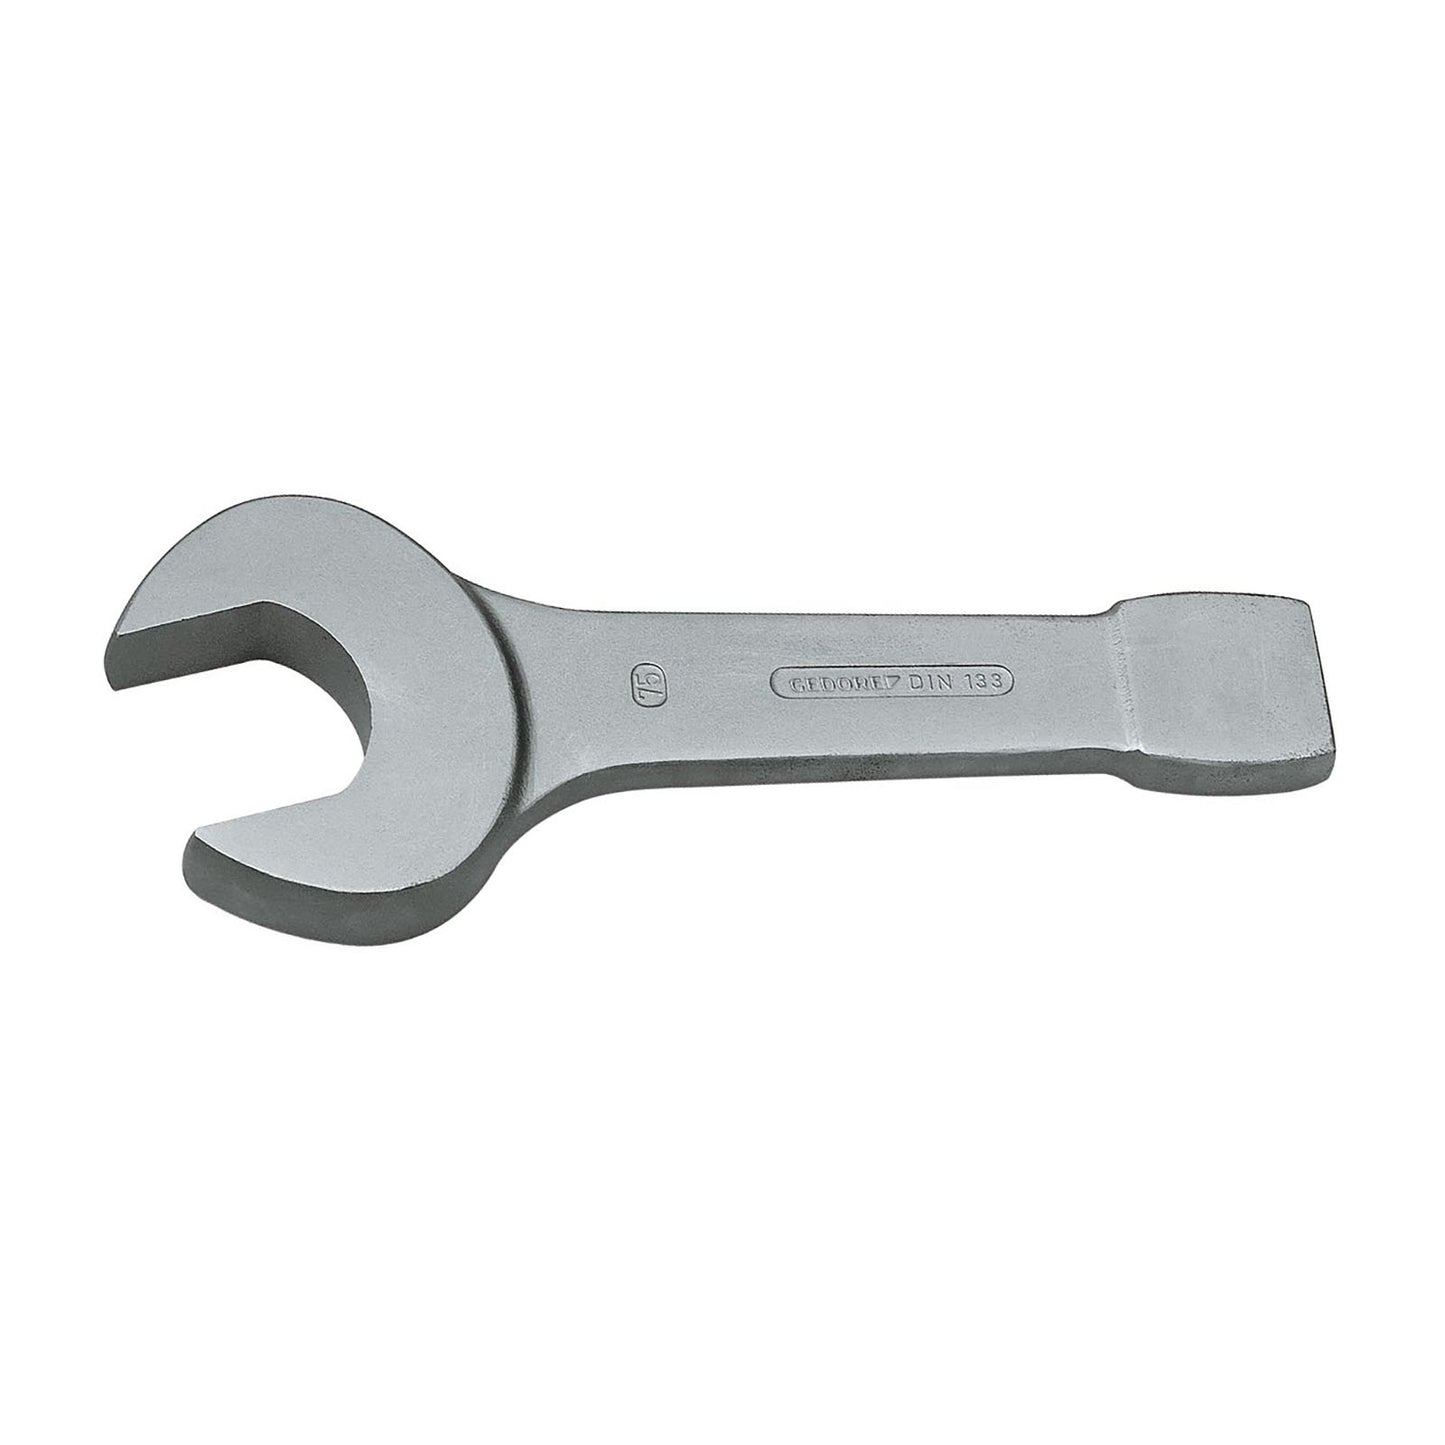 GEDORE 133 41 - Open Strike Wrench, 41mm (6400500)